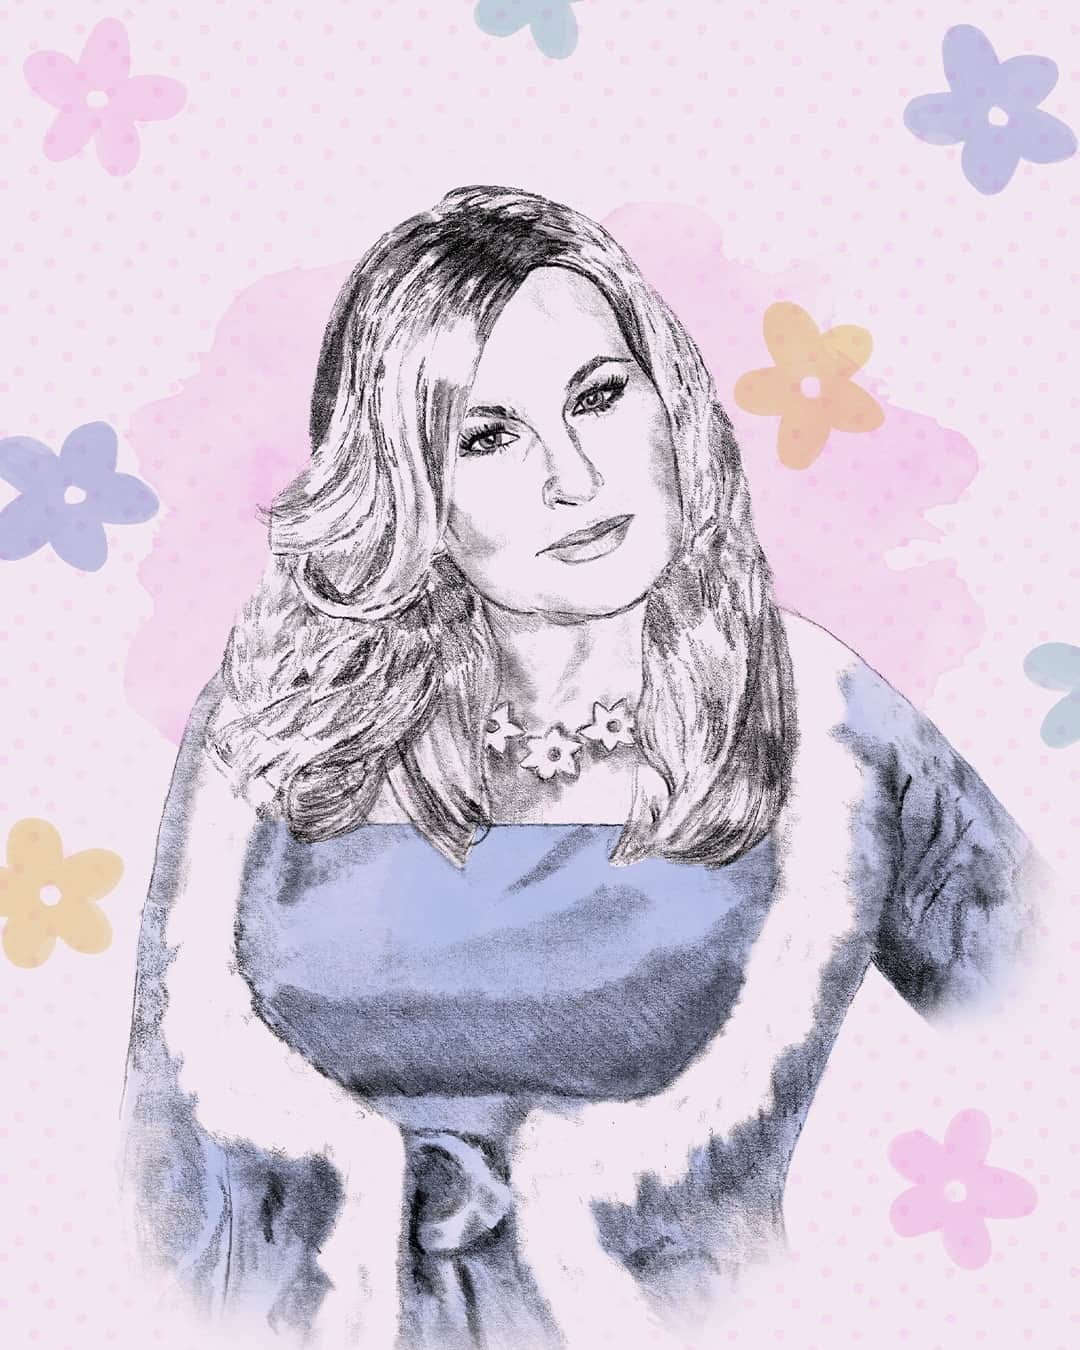 frankie magazineのインスタグラム：「when jennifer coolidge won 'best supporting actress in a limited series' at the 2022 emmys, she thanked the 'white lotus' creator mike white for reviving her career. had you just met coolidge through her immaculate portrayal of lonely ageing heiress tanya mcquoid in white's series, you might be forgiven for thinking that's true. maybe. but the coolidge stans among us know she was selling herself short there, as she's been the star of many classics – and our hearts – long before mike white was even a contestant on survivor (look it up! it's true!).⁠ ⁠ in issue 115, writer rebecca varcoe rounds up coolidge's top performances. you'll find a copy of the mag in your local supermarket or newsagent (you'll want to grab some movie snacks while you're there, too!). ⁠ ⁠ rad illustration by @cassurquhart」